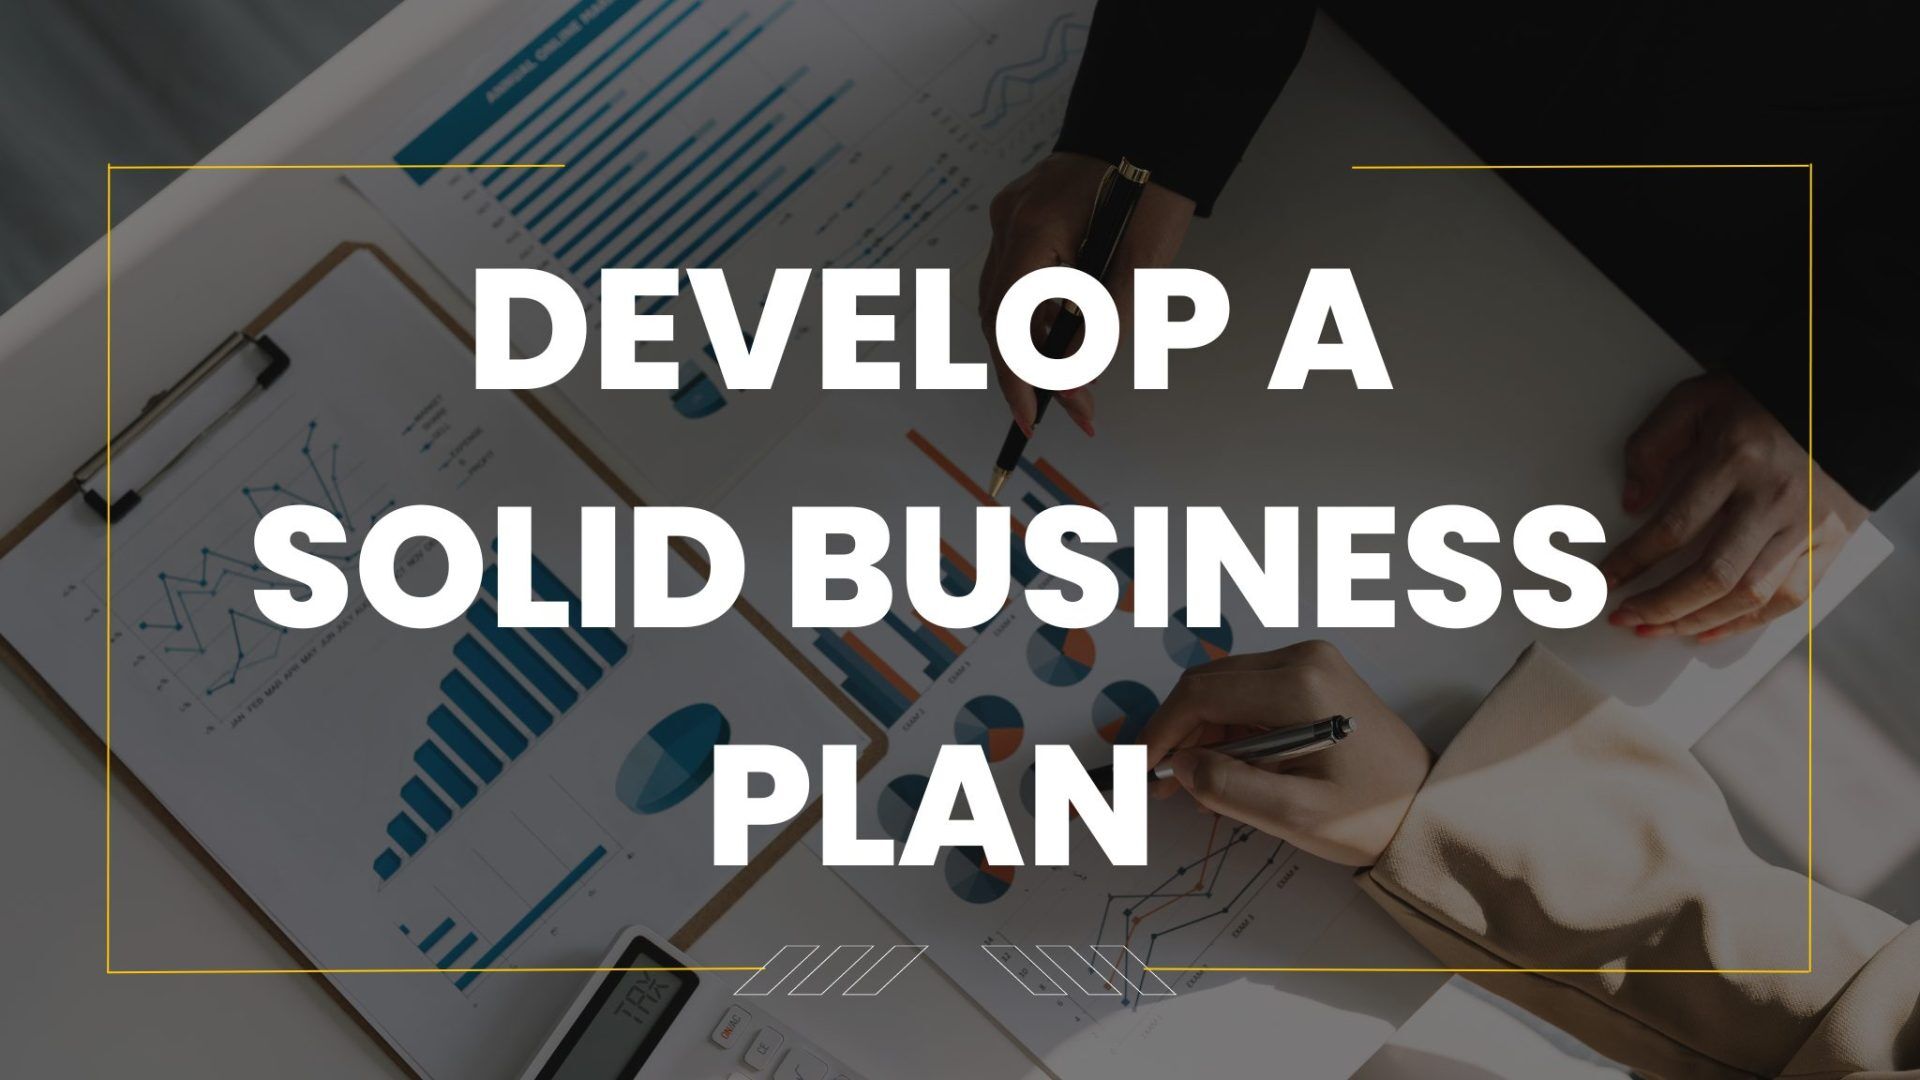 solid business plan meaning